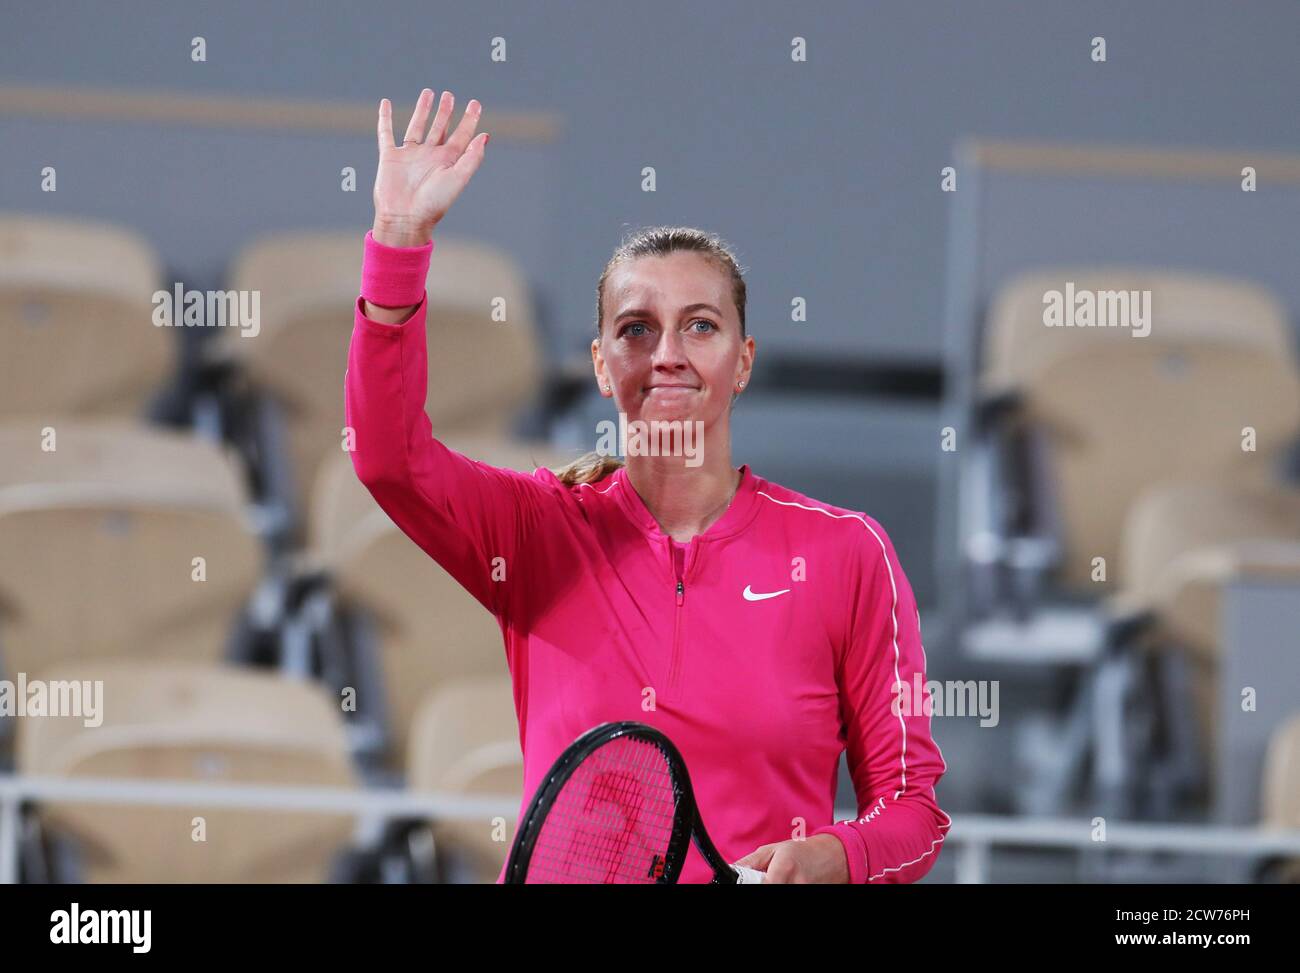 Paris, France. 28th Sep, 2020. Petra Kvitova of Czech Republic celebrates after the women's singles first round match against Oceane Dodin of France at French Open tennis tournament 2020 at Roland Garros in Paris, France, Sept. 28, 2020. Credit: Gao Jing/Xinhua/Alamy Live News Stock Photo